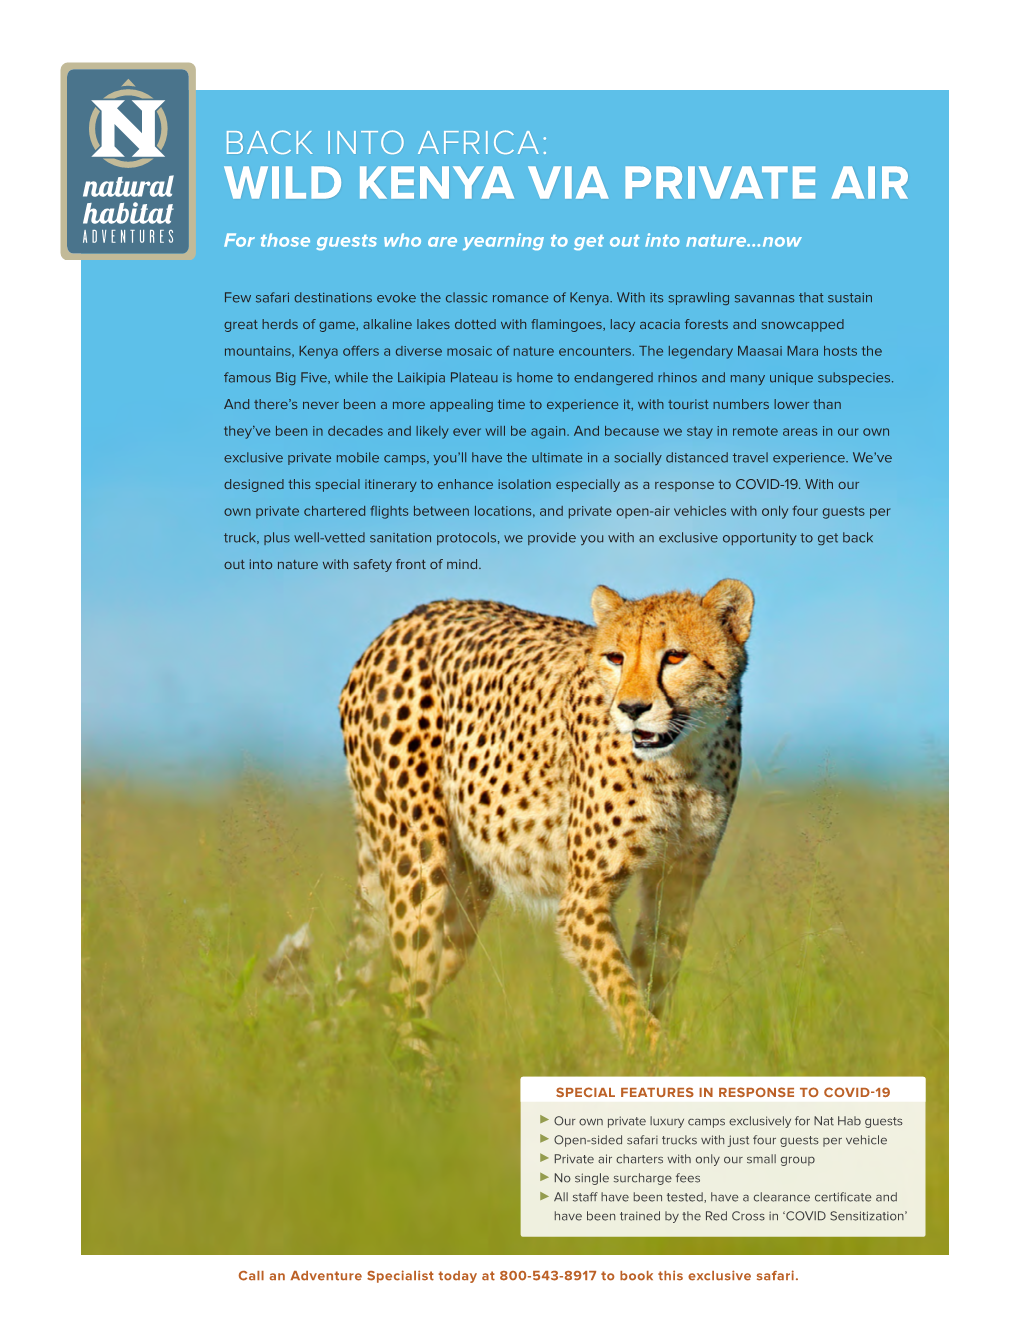 WILD KENYA VIA PRIVATE AIR for Those Guests Who Are Yearning to Get out Into Nature…Now